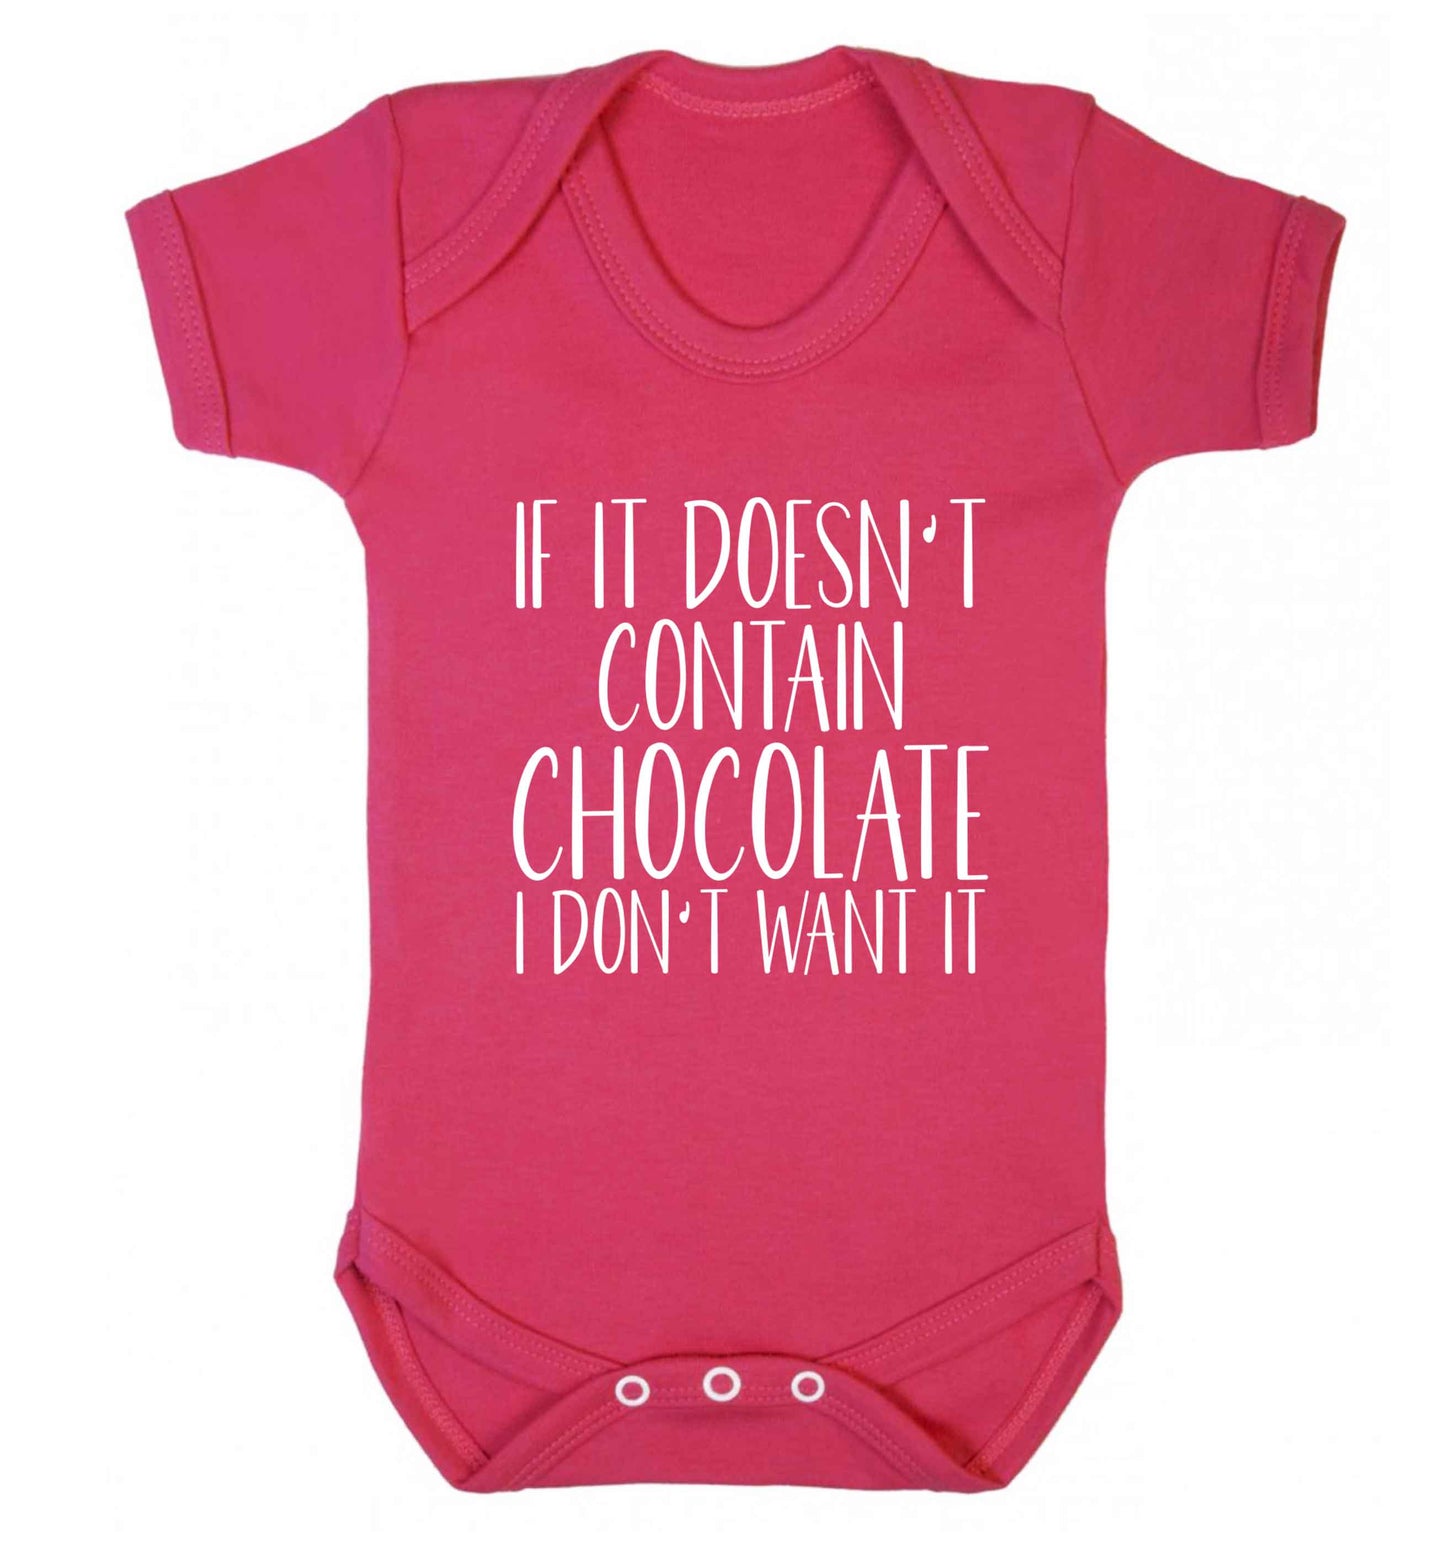 If it doesn't contain chocolate I don't want it baby vest dark pink 18-24 months